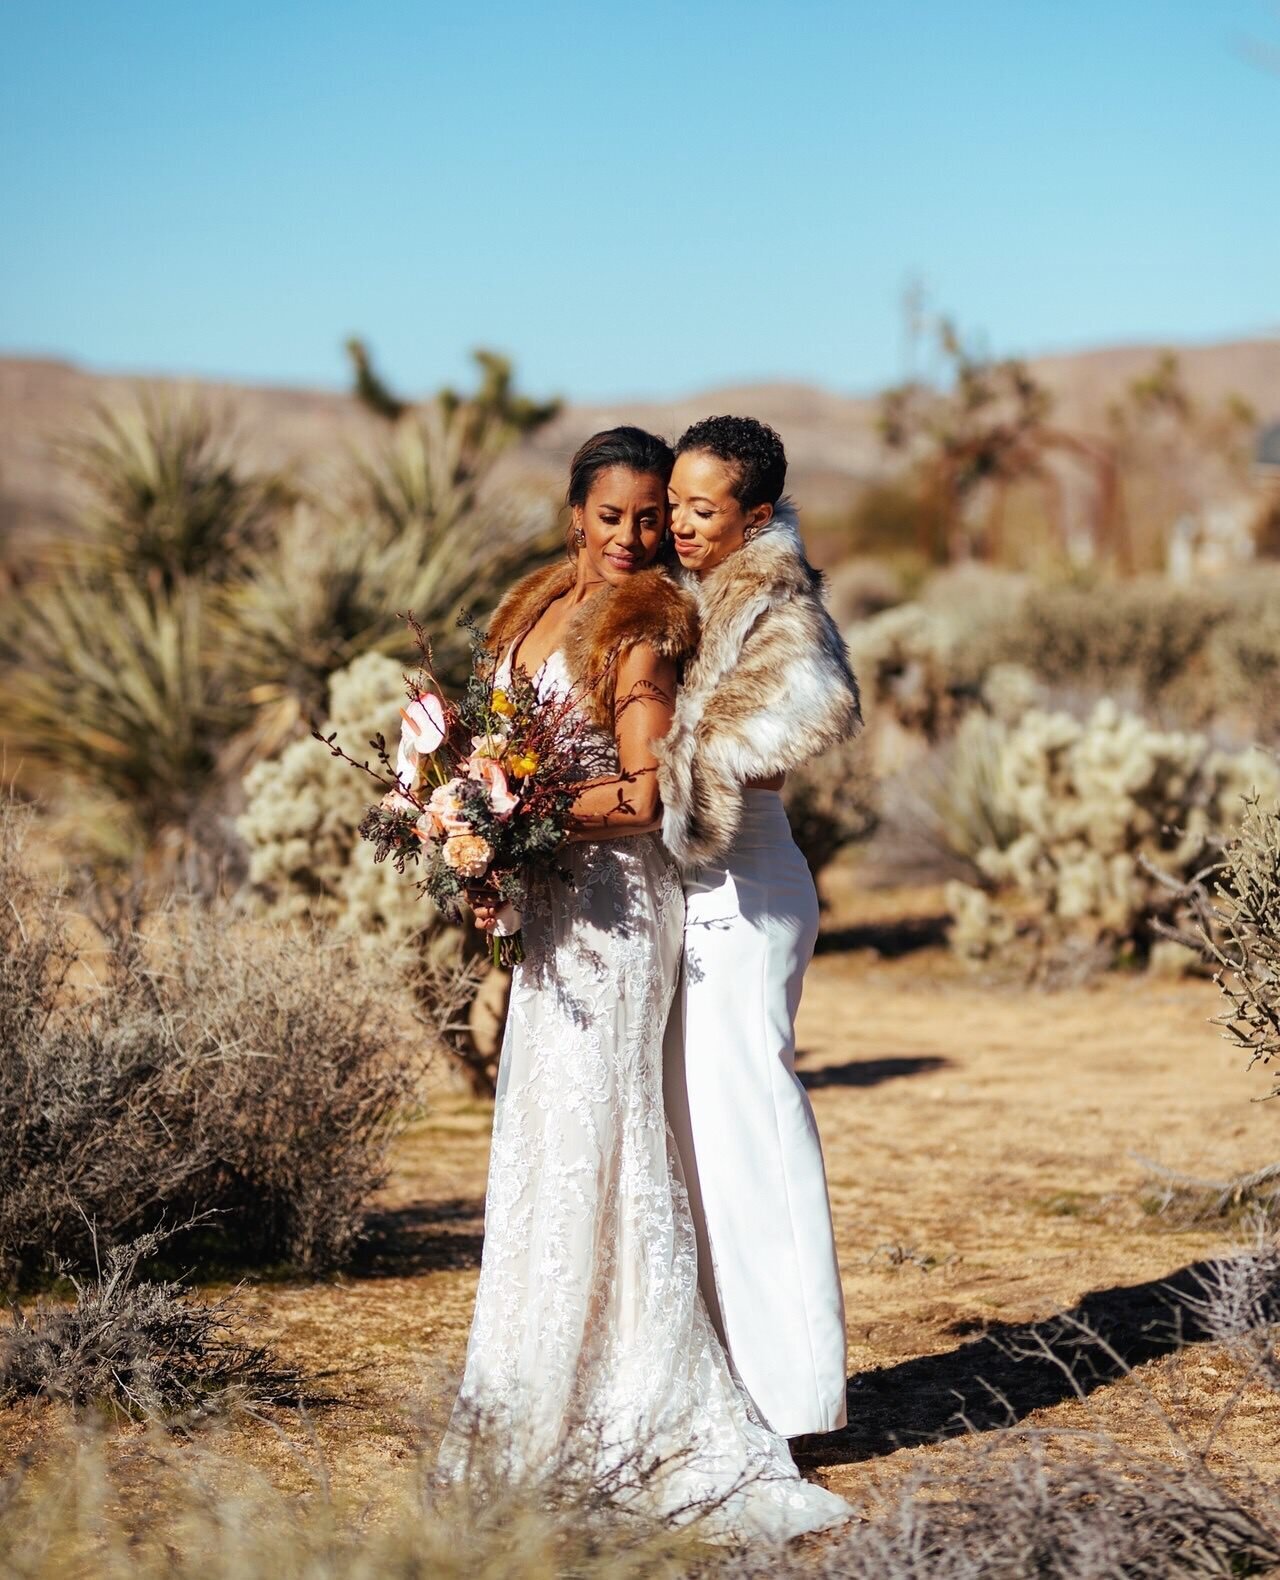 Two brides in white and fur posing together in the Palm Springs desert Shawnee Custalow Queer Wedding Photographer